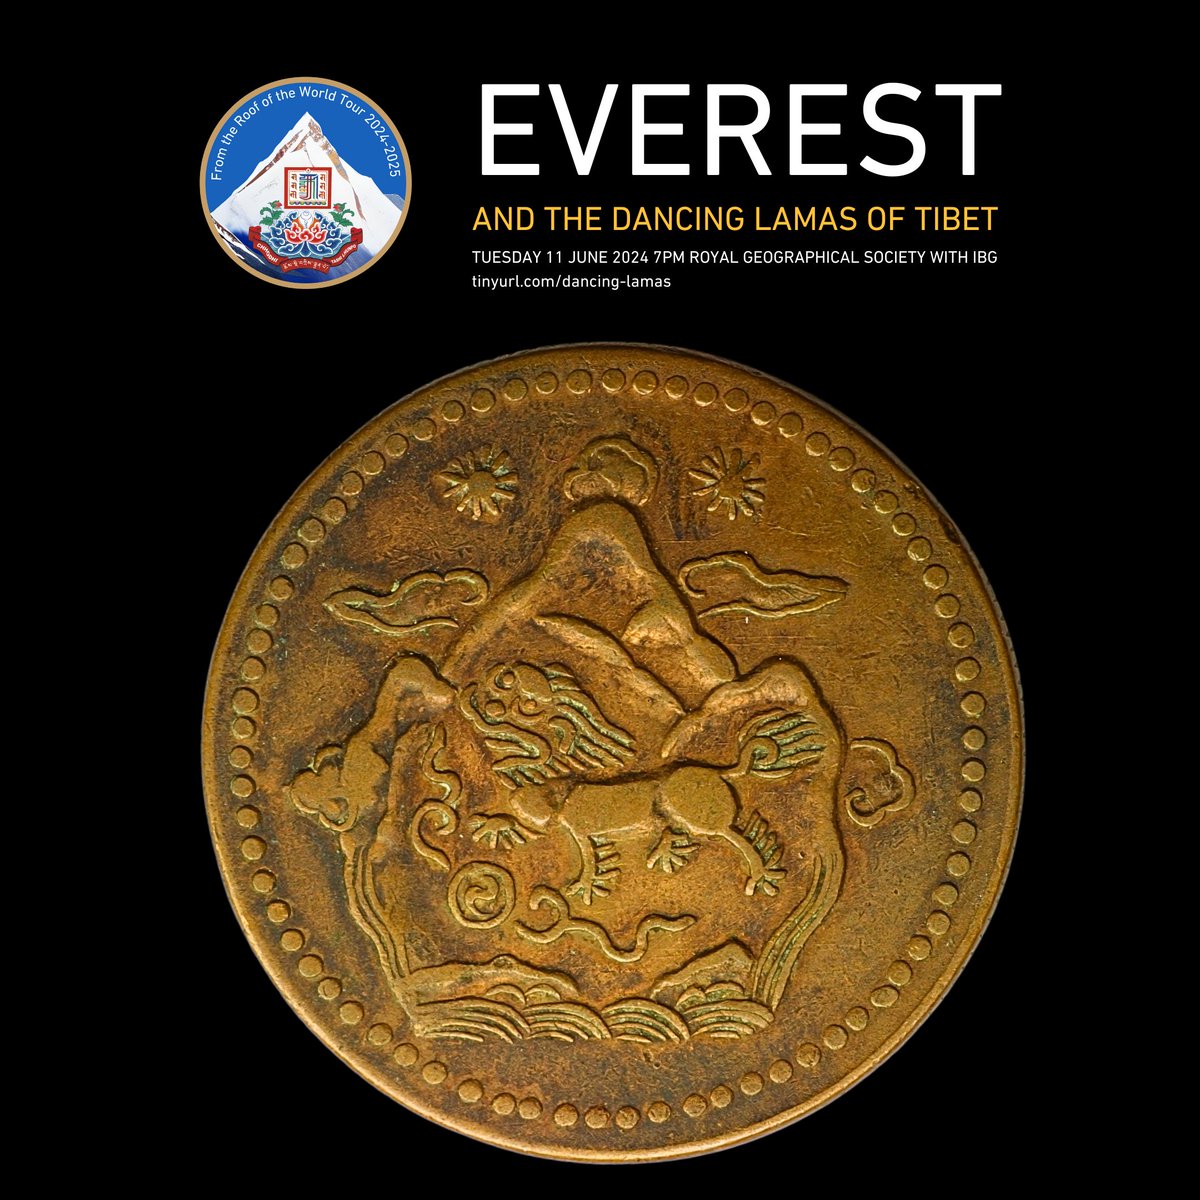 The snow-capped Himalaya are intimately associated with Tibet, both in terms of the country’s own national identity and the western fascination with a land perceived as mysterious and inaccessible. 
tinyurl.com/4stejd65 #Everest1924 #Everest #Tibet #DancingLamas #Tibetmania